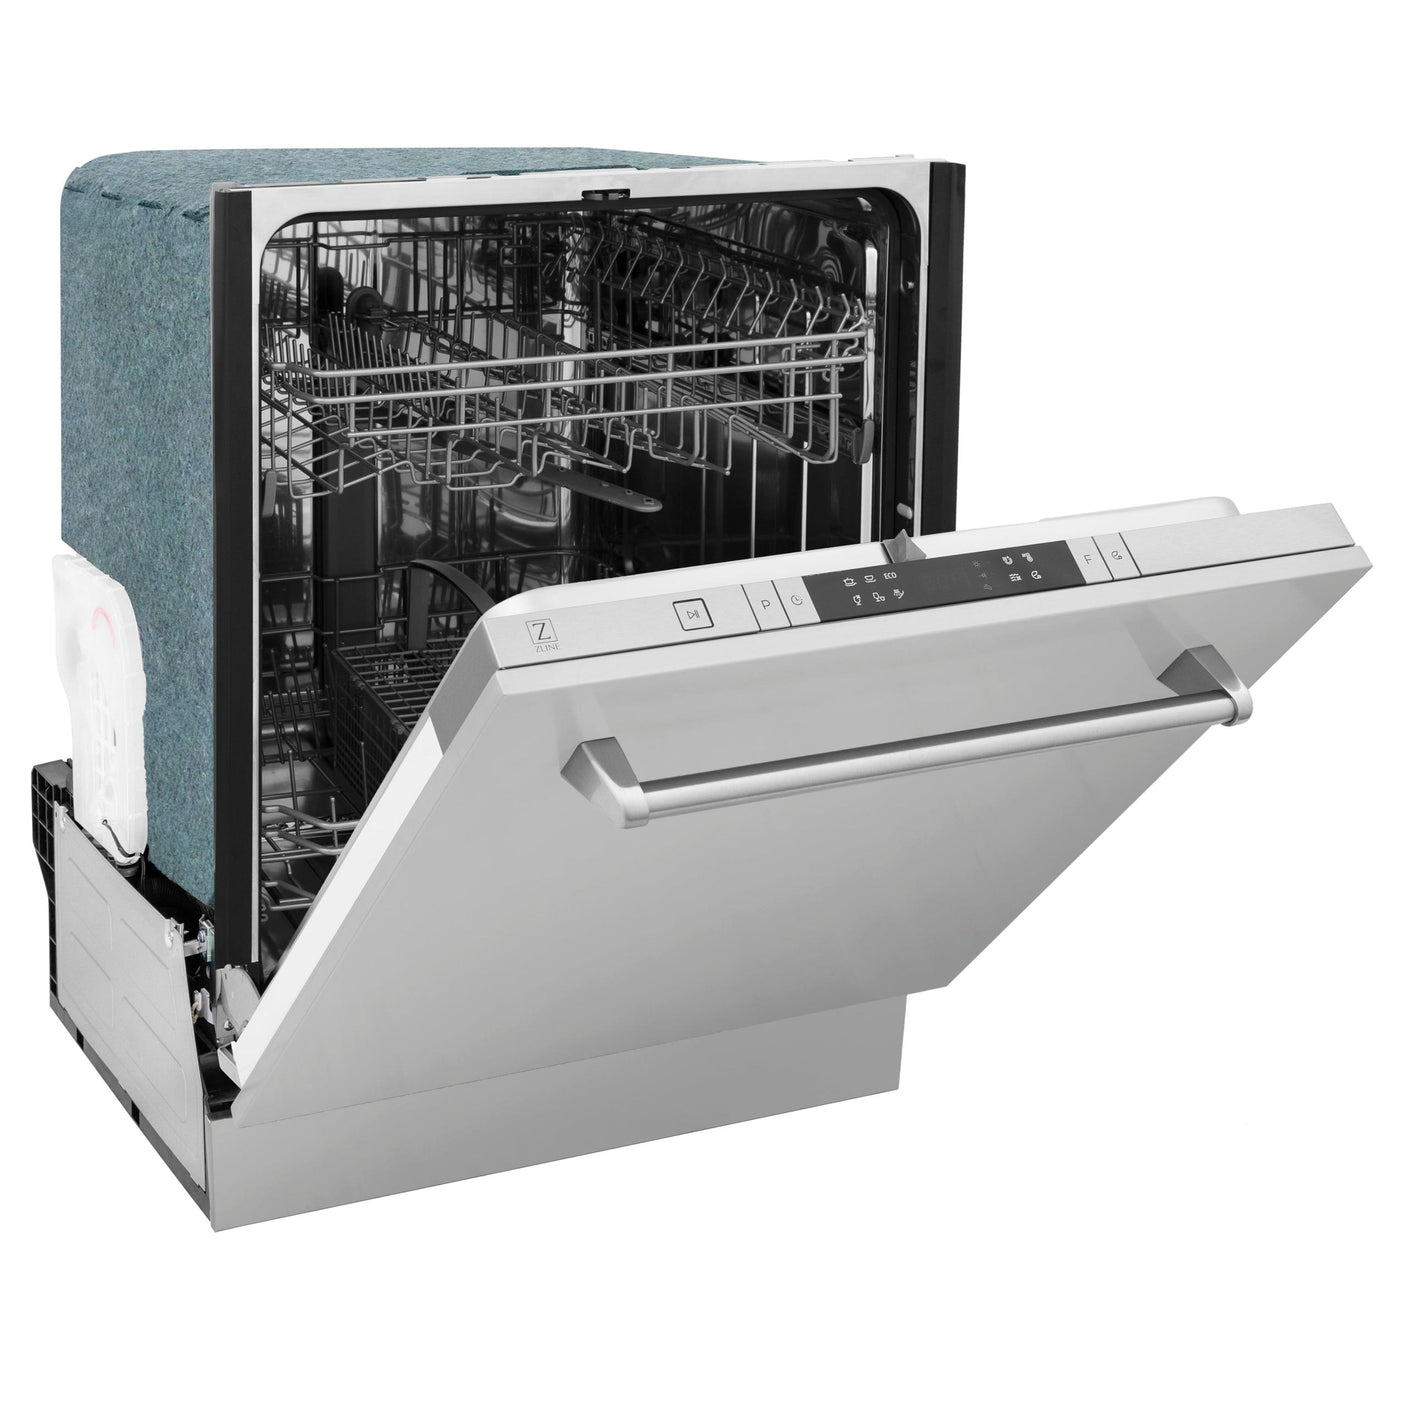 ZLINE 24 in. Top Control Dishwasher with Stainless Steel Tub and Traditional Style Handle, 52dBa (DW-24) [Color: Stainless Steel]